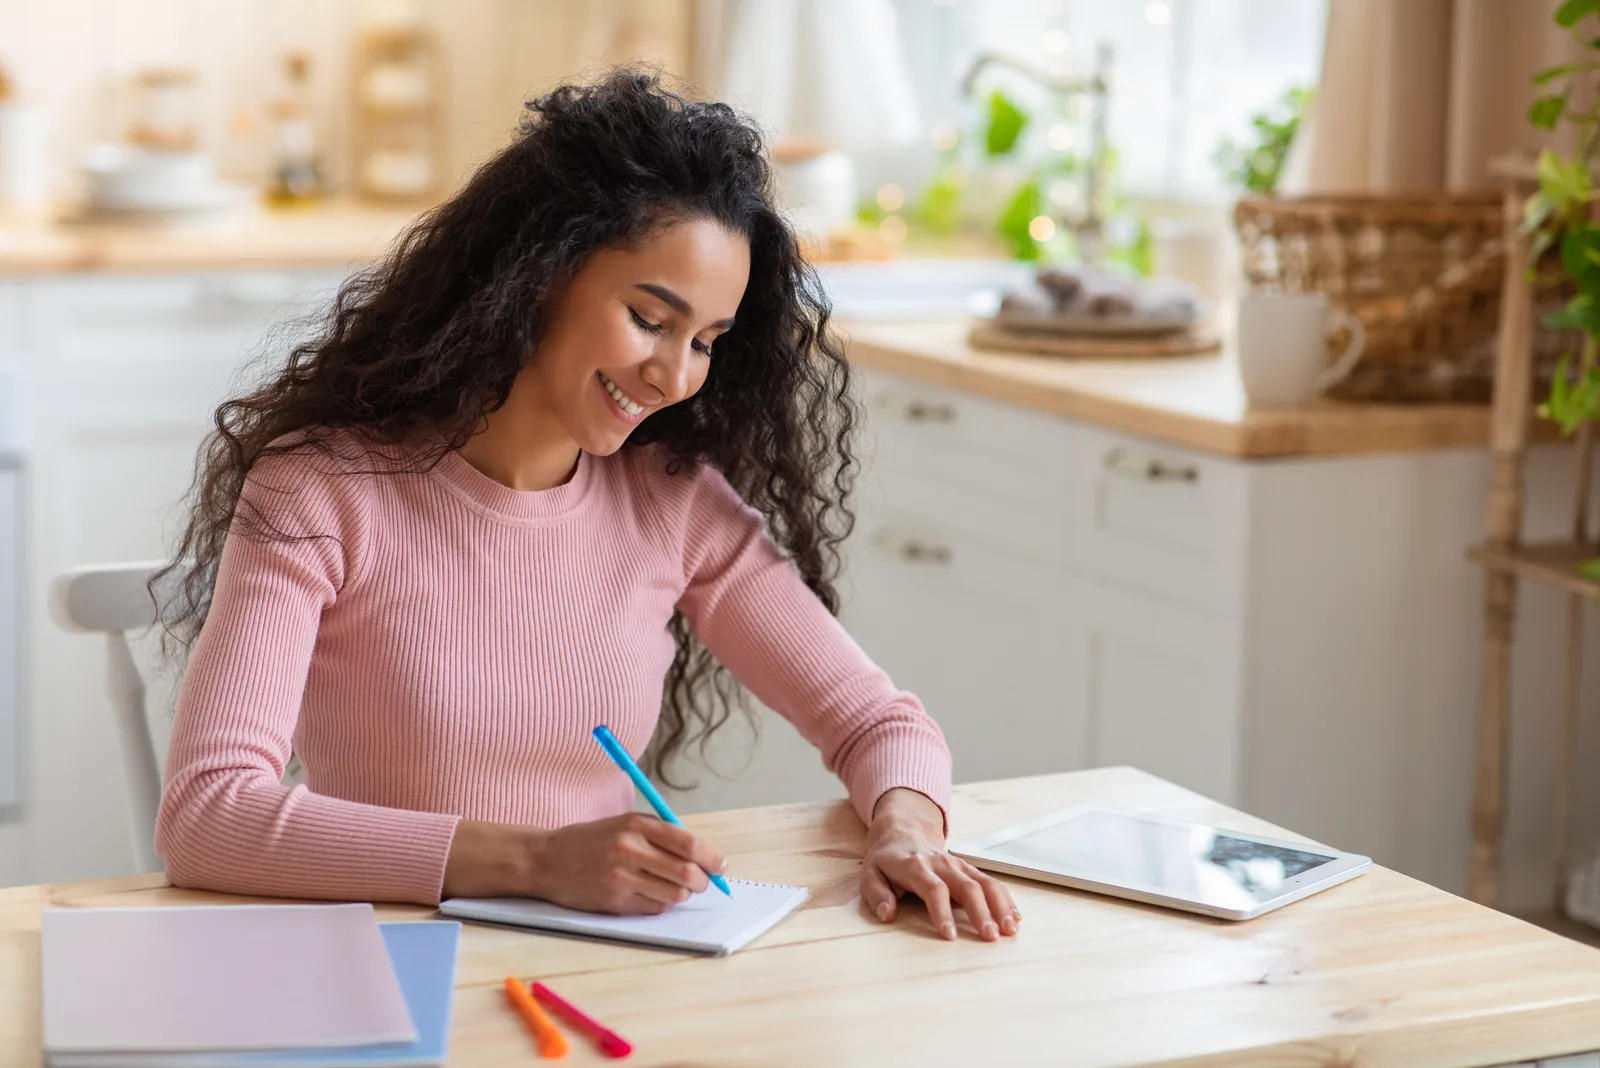 a smiling woman with frizzy hair sits at a table and writes